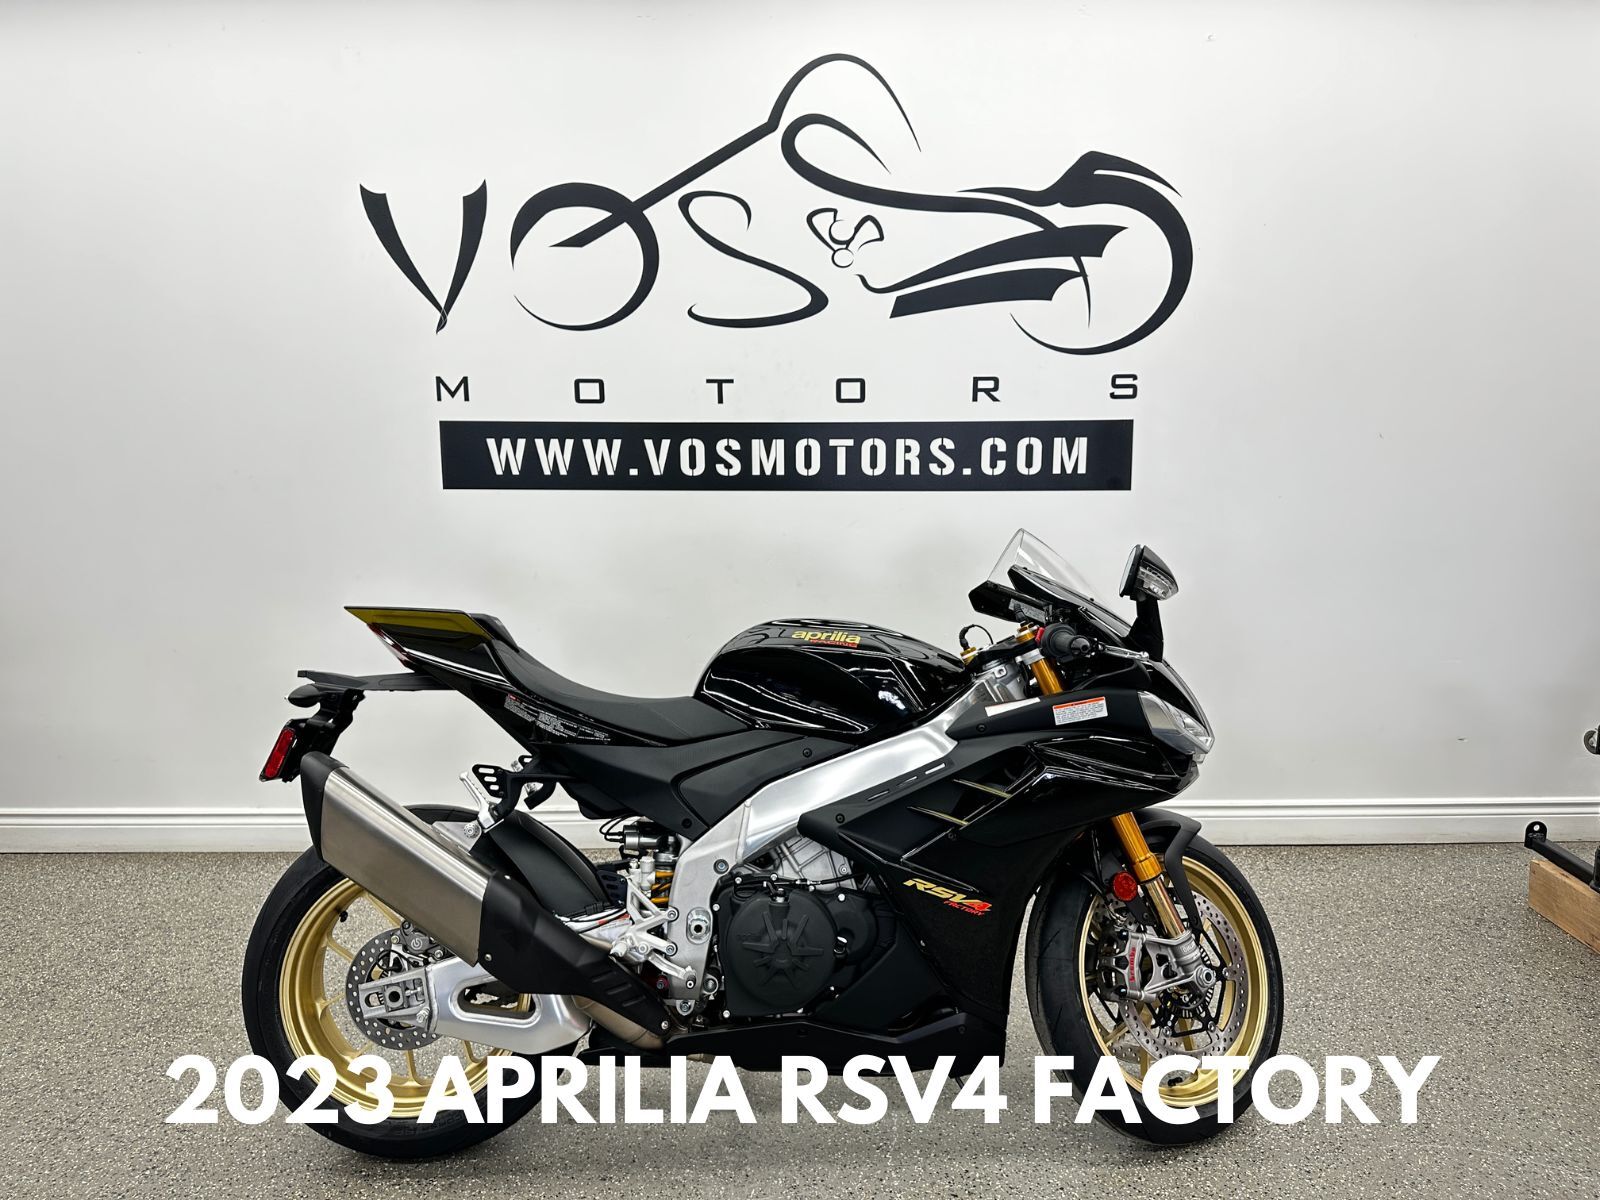 2023 Aprilia RSV4 Factory APRC My 23 - V5671 - -No Payments for 1 Year**